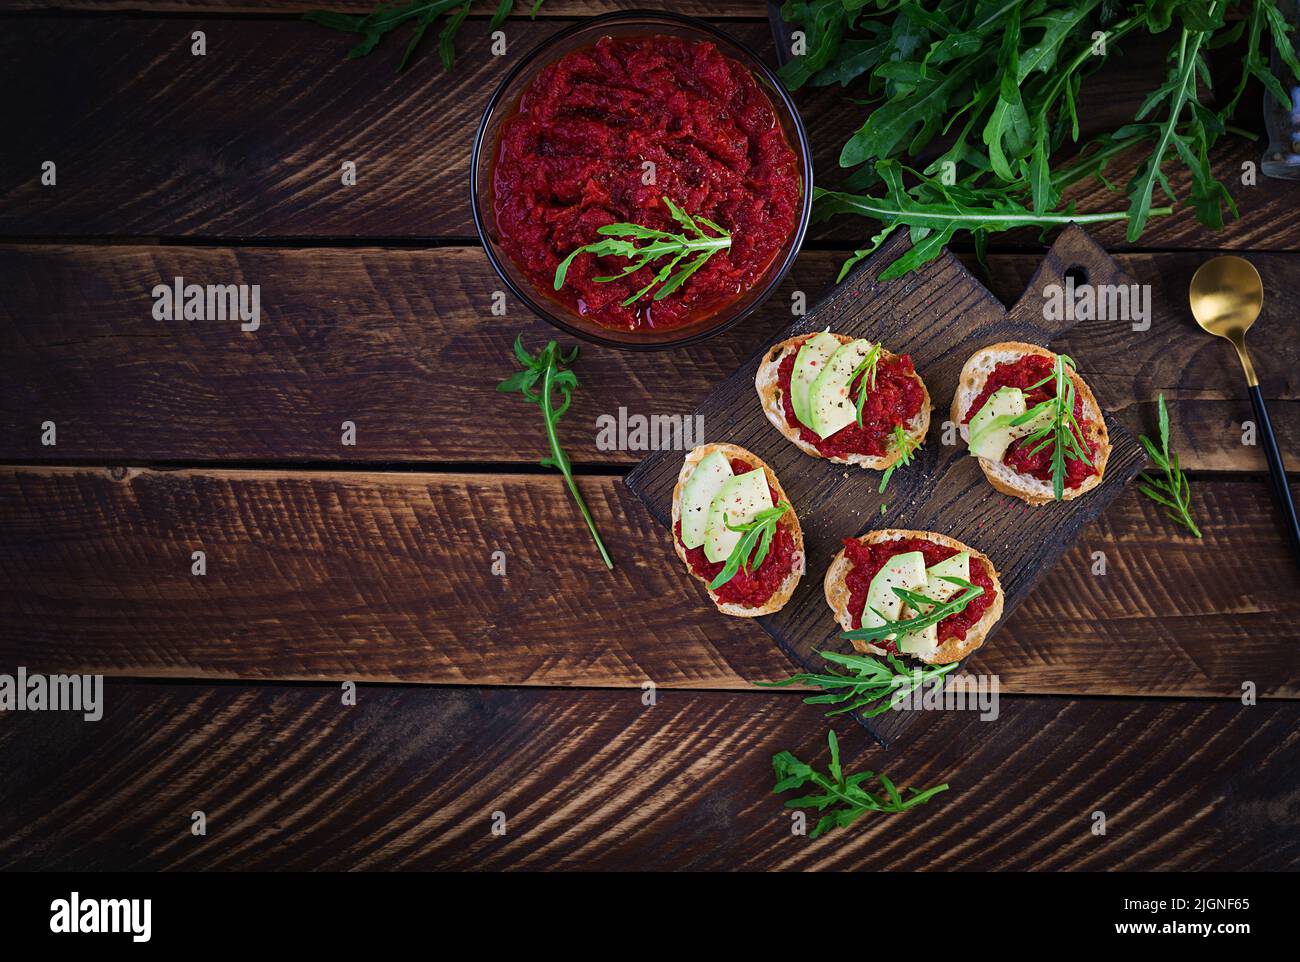 Vegetarian food. Healthy eating. Sandwiches with beetroot  pate. Top view, overhead Stock Photo